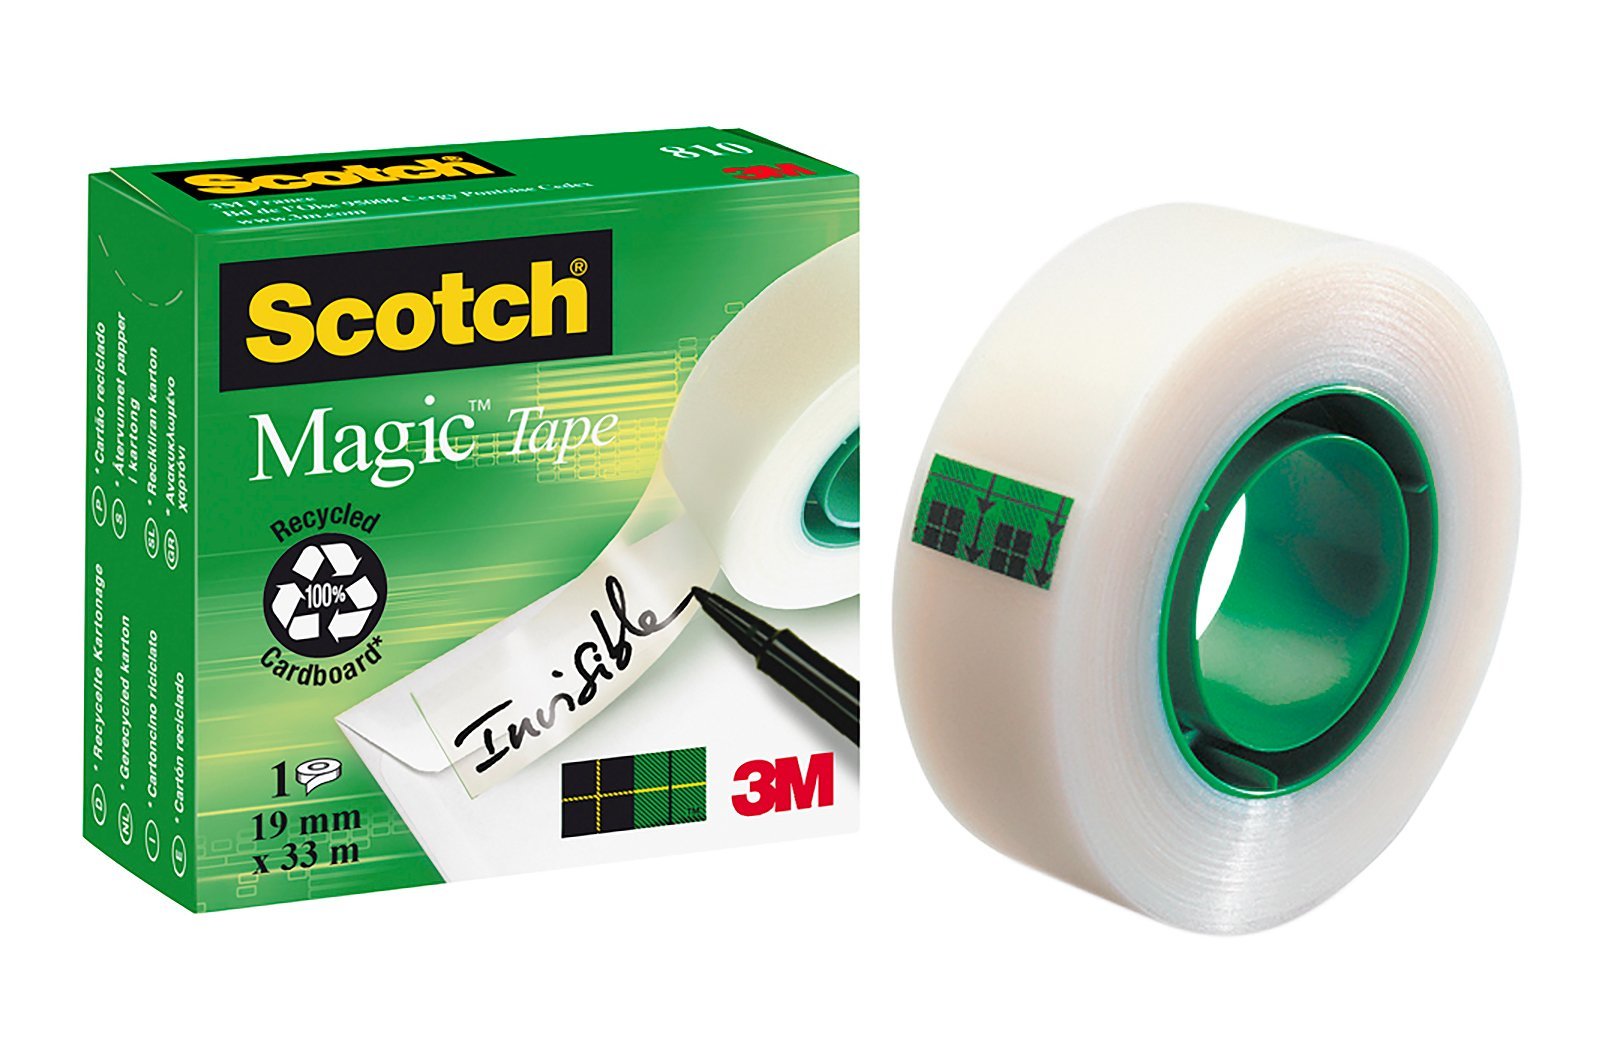 dat is alles definitief Frustratie Buy 3M Scotch Magic Tape 810 (green), invisible online at Modulor